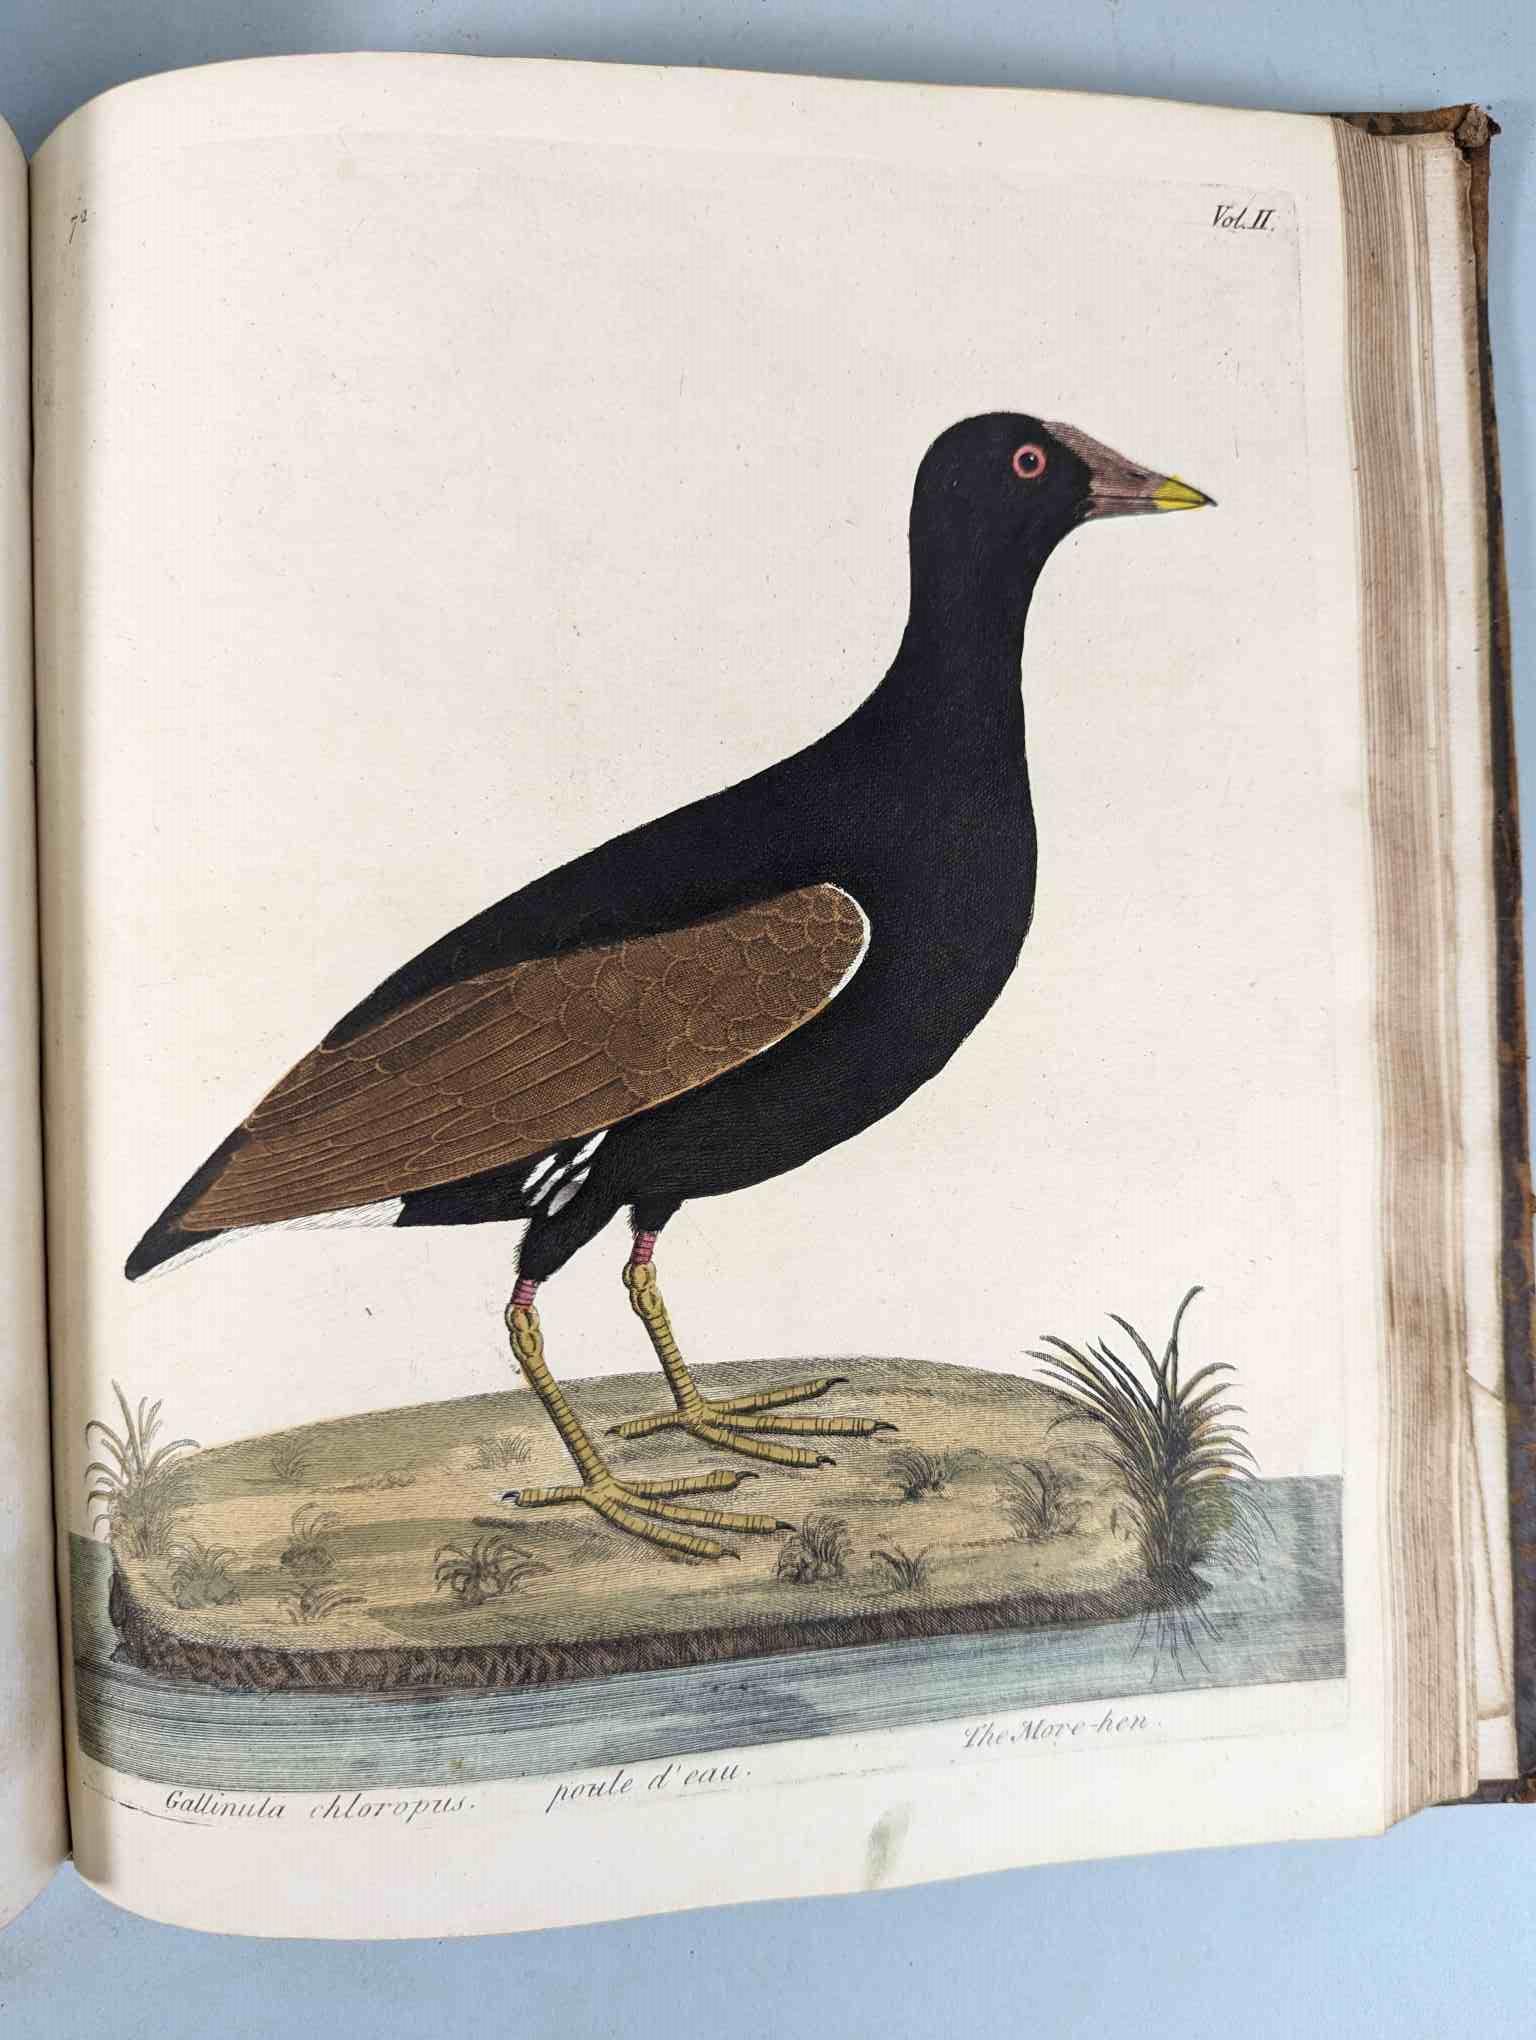 ALBIN, Eleazar. A Natural History of Birds, to which are added, Notes and Observations by W. - Image 176 of 208